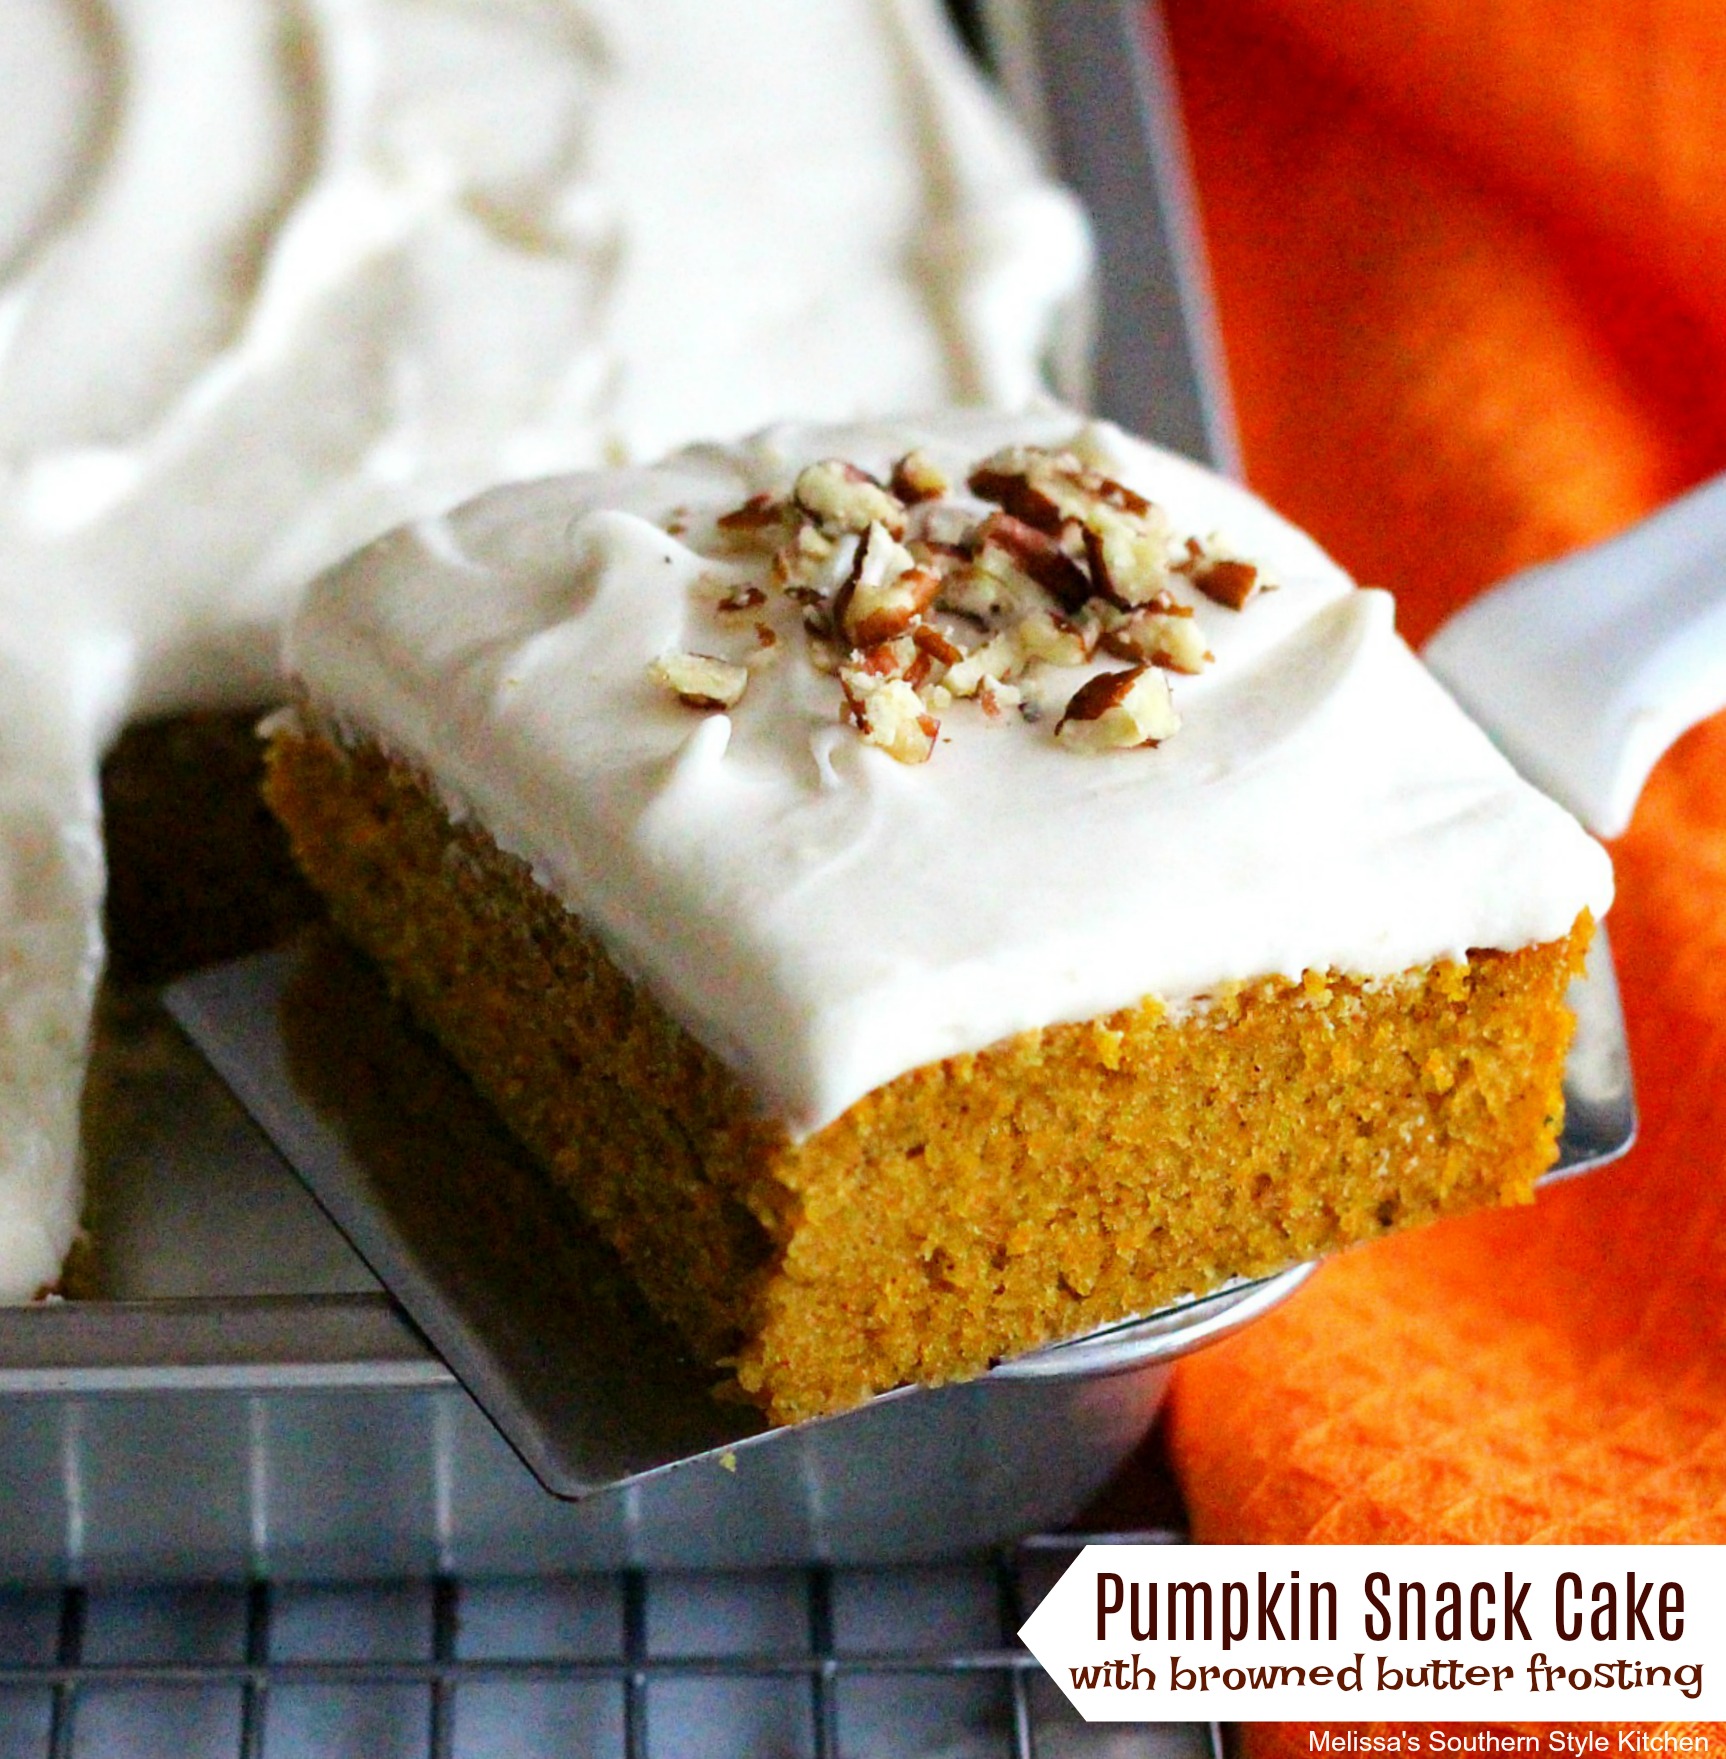 Pumpkin Snack Cake With Browned Butter Frosting